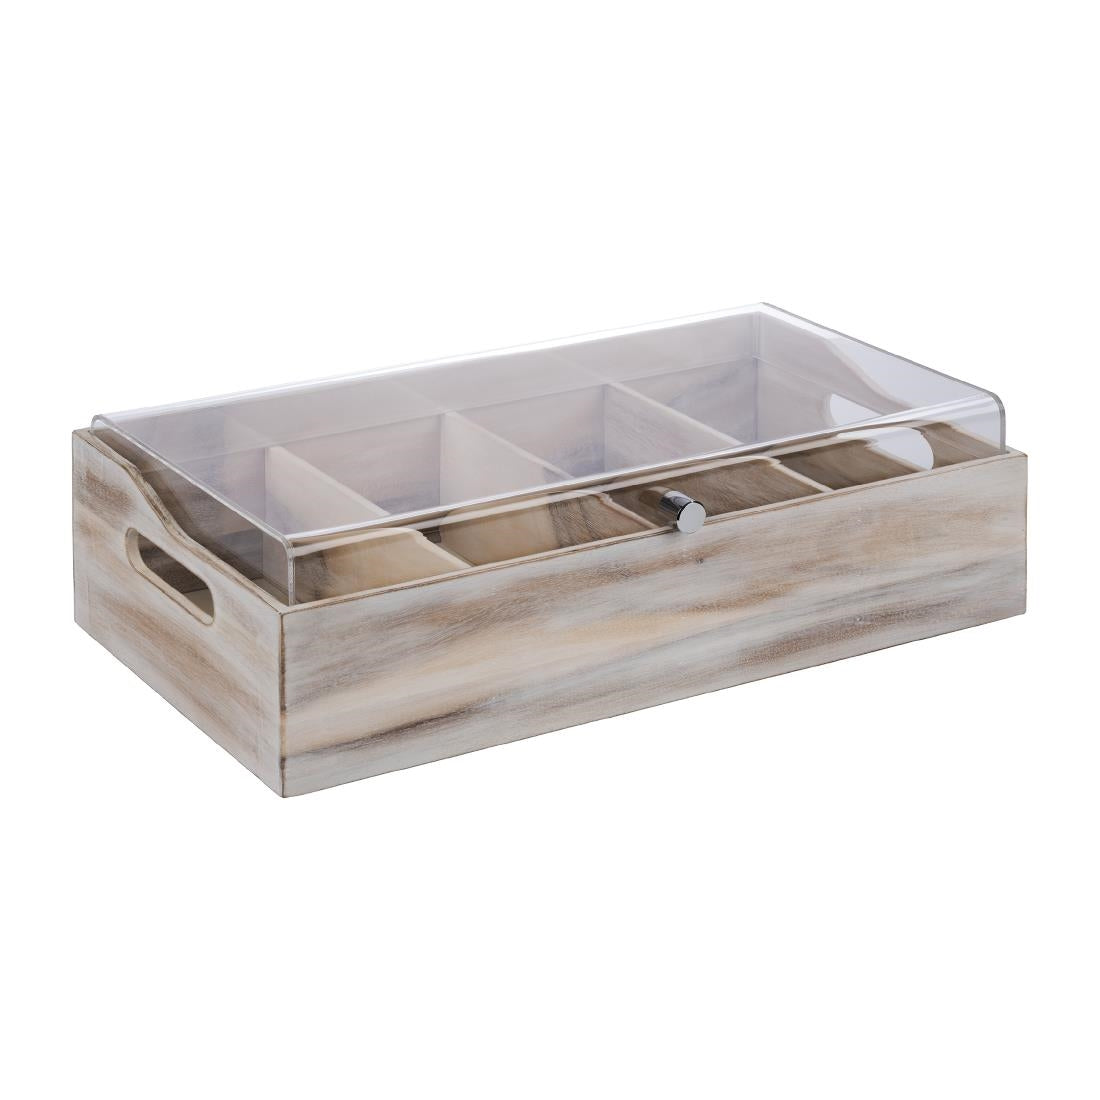 APS Cutlery Tray With Cover 510 x 280mm